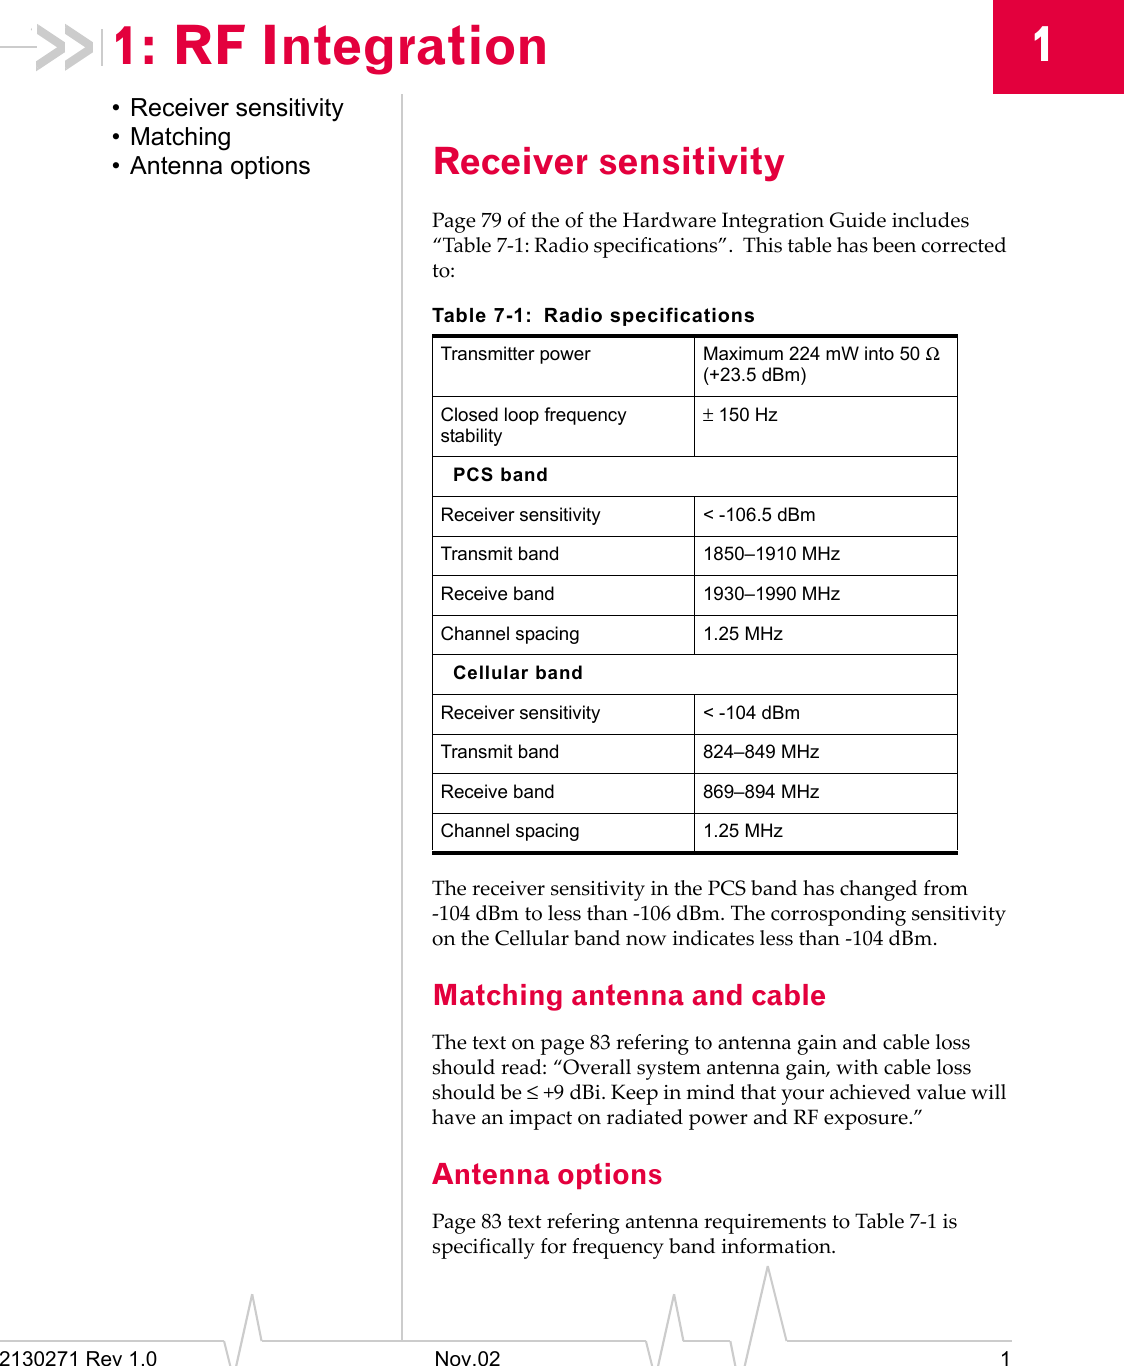 2130271 Rev 1.0 Nov.02 111: RF Integration• Receiver sensitivity• Matching• Antenna options Receiver sensitivityPage 79 of the of the Hardware Integration Guide includes “Table 7-1: Radio specifications”.  This table has been corrected to:The receiver sensitivity in the PCS band has changed from -104 dBm to less than -106 dBm. The corrosponding sensitivity on the Cellular band now indicates less than -104 dBm.Matching antenna and cableThe text on page 83 refering to antenna gain and cable loss should read: “Overall system antenna gain, with cable loss should be ≤+9 dBi. Keep in mind that your achieved value will have an impact on radiated power and RF exposure.”Antenna optionsPage 83 text refering antenna requirements to Table 7-1 is specifically for frequency band information.Table 7-1: Radio specificationsTransmitter power Maximum 224 mW into 50 Ω (+23.5 dBm)Closed loop frequency stability± 150 HzPCS bandReceiver sensitivity &lt; -106.5 dBmTransmit band 1850–1910 MHzReceive band 1930–1990 MHzChannel spacing 1.25 MHzCellular bandReceiver sensitivity  &lt; -104 dBmTransmit band 824–849 MHzReceive band 869–894 MHzChannel spacing 1.25 MHz